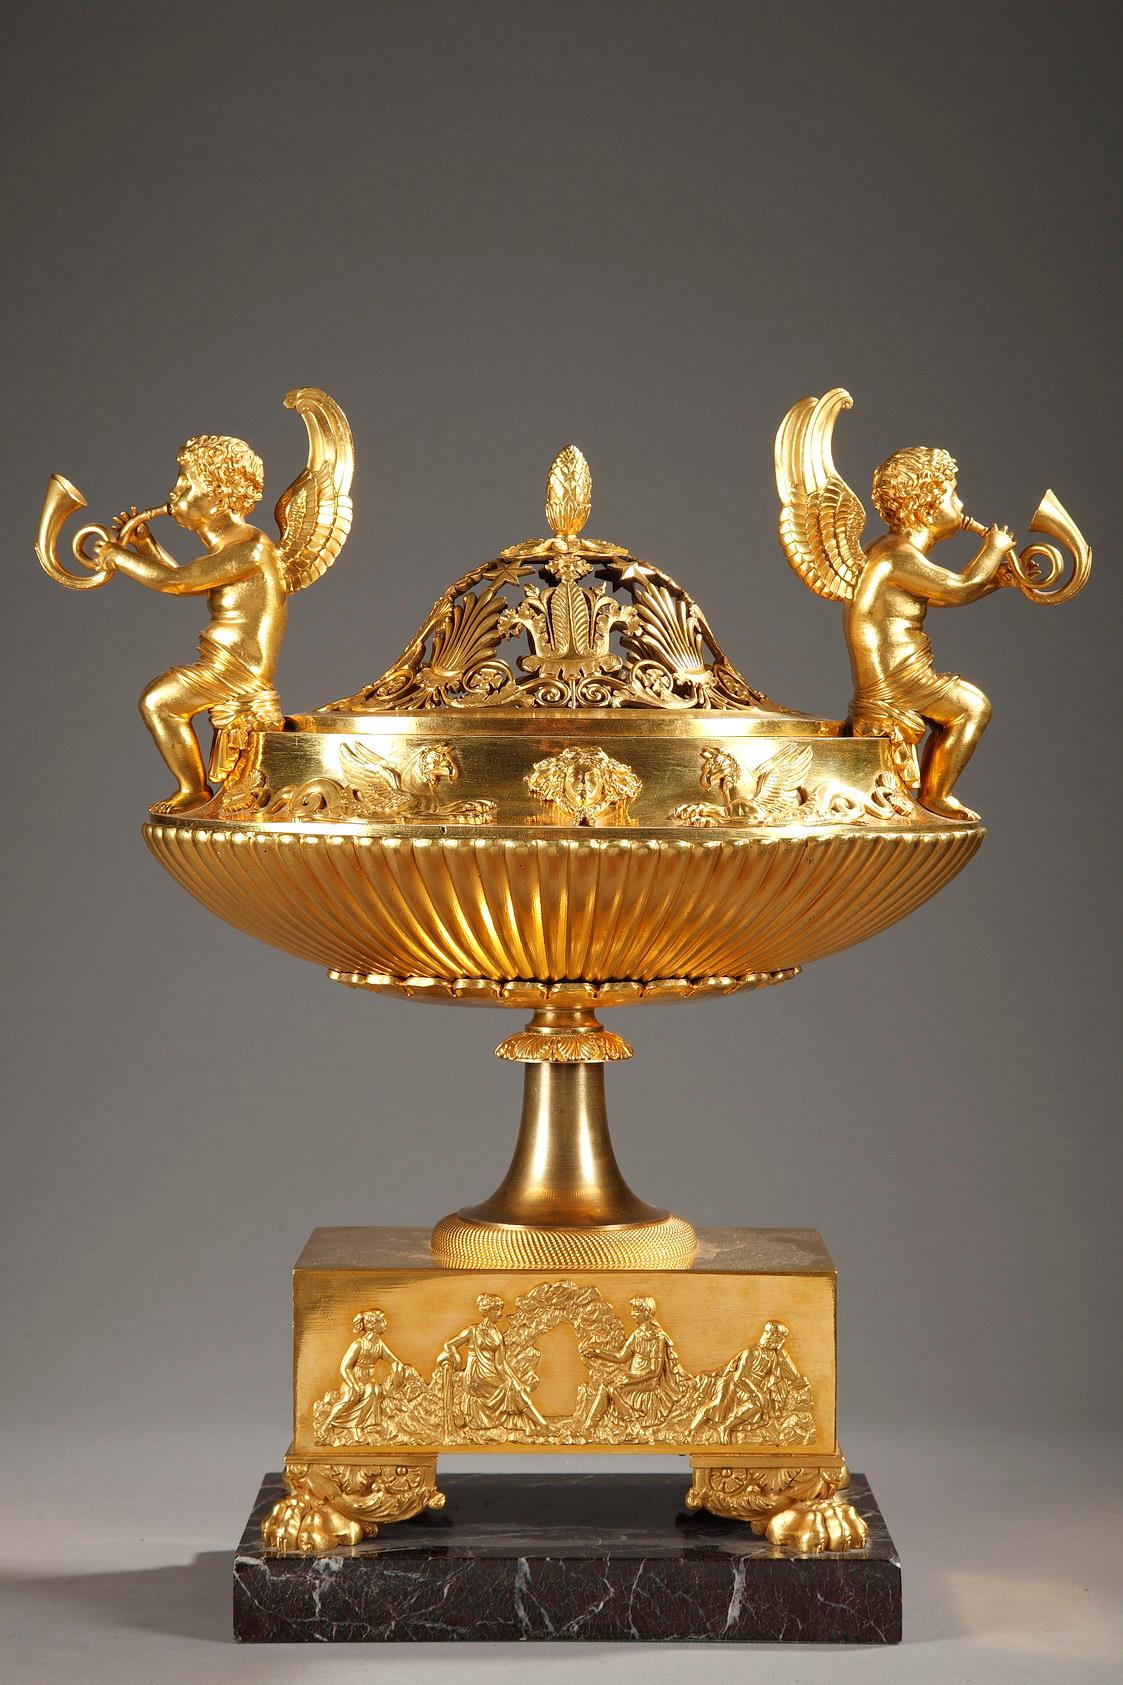 Empire gilt bronze and marble table top perfume burner